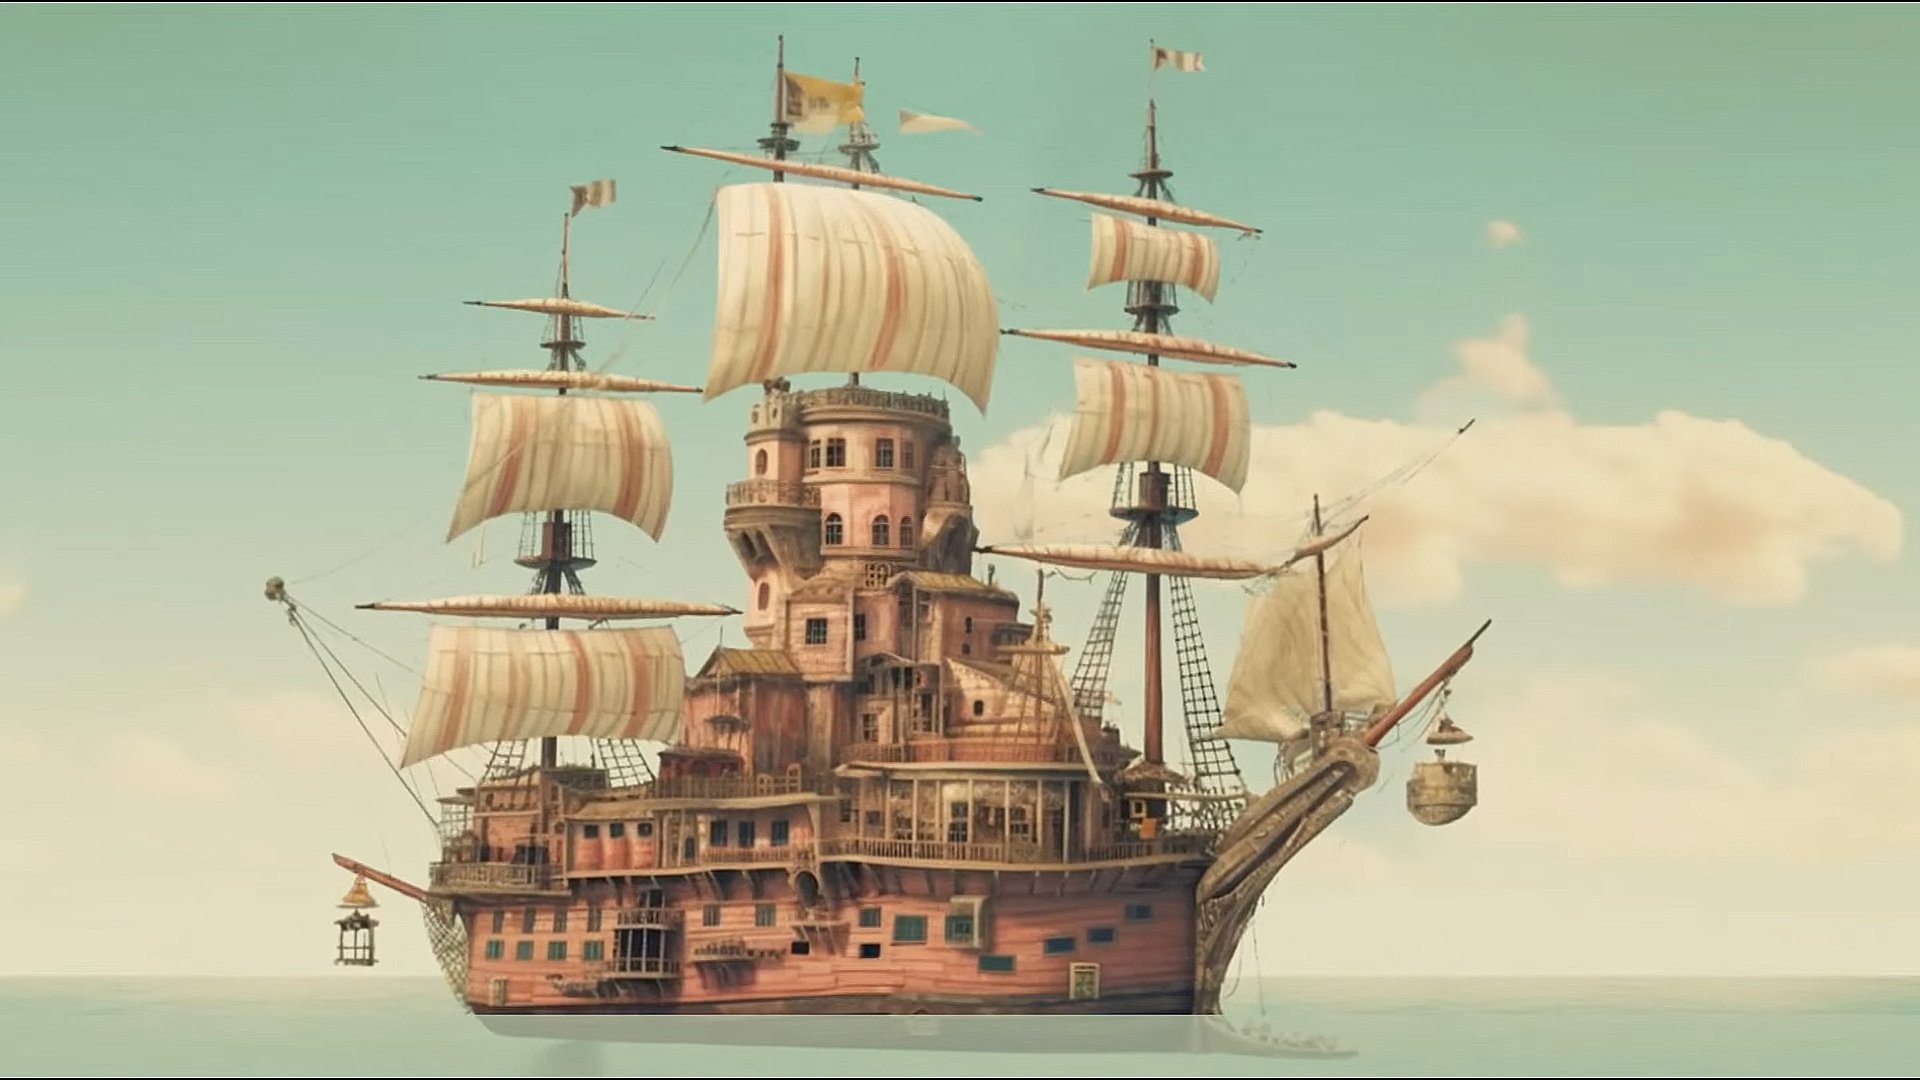 If "Pirates of the Caribbean" was directed by Wes Anderson: 15 frames from the neural network